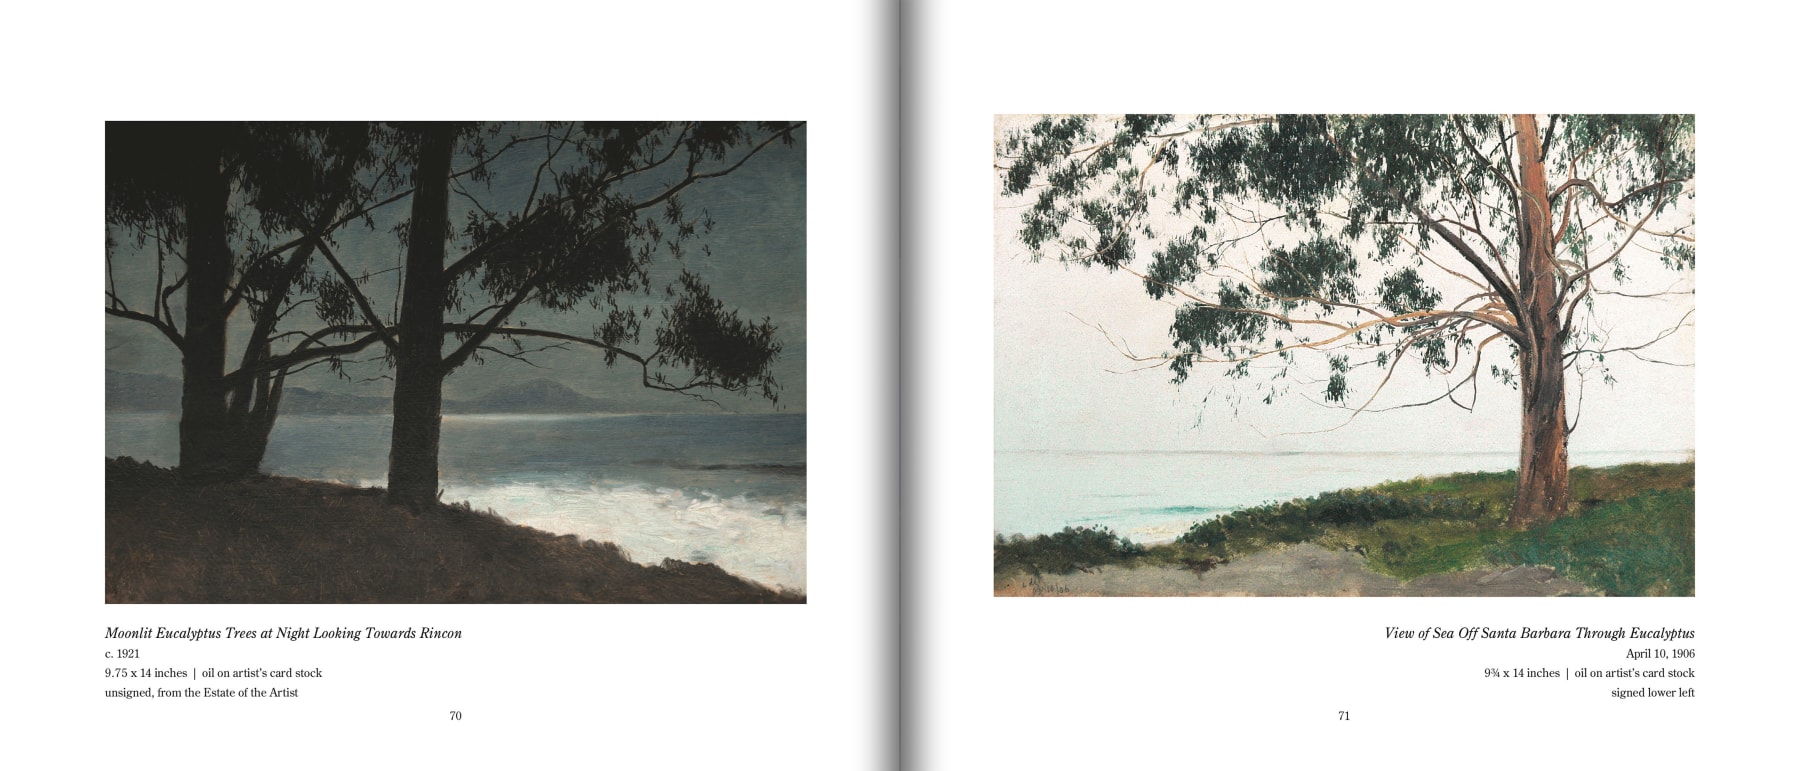 Pages 70 and 71 of De Forest's SANTA BARBARA, featuring &quot;Moonlit Eucalyptus Trees at Night Looking Towards Rincon&quot;, c. 1921 and &quot;View of Sea Off Santa Barbara Through Eucalyputs&quot;, Apr. 10, 106 by LOCKWOOD DE FOREST (1850-1932)